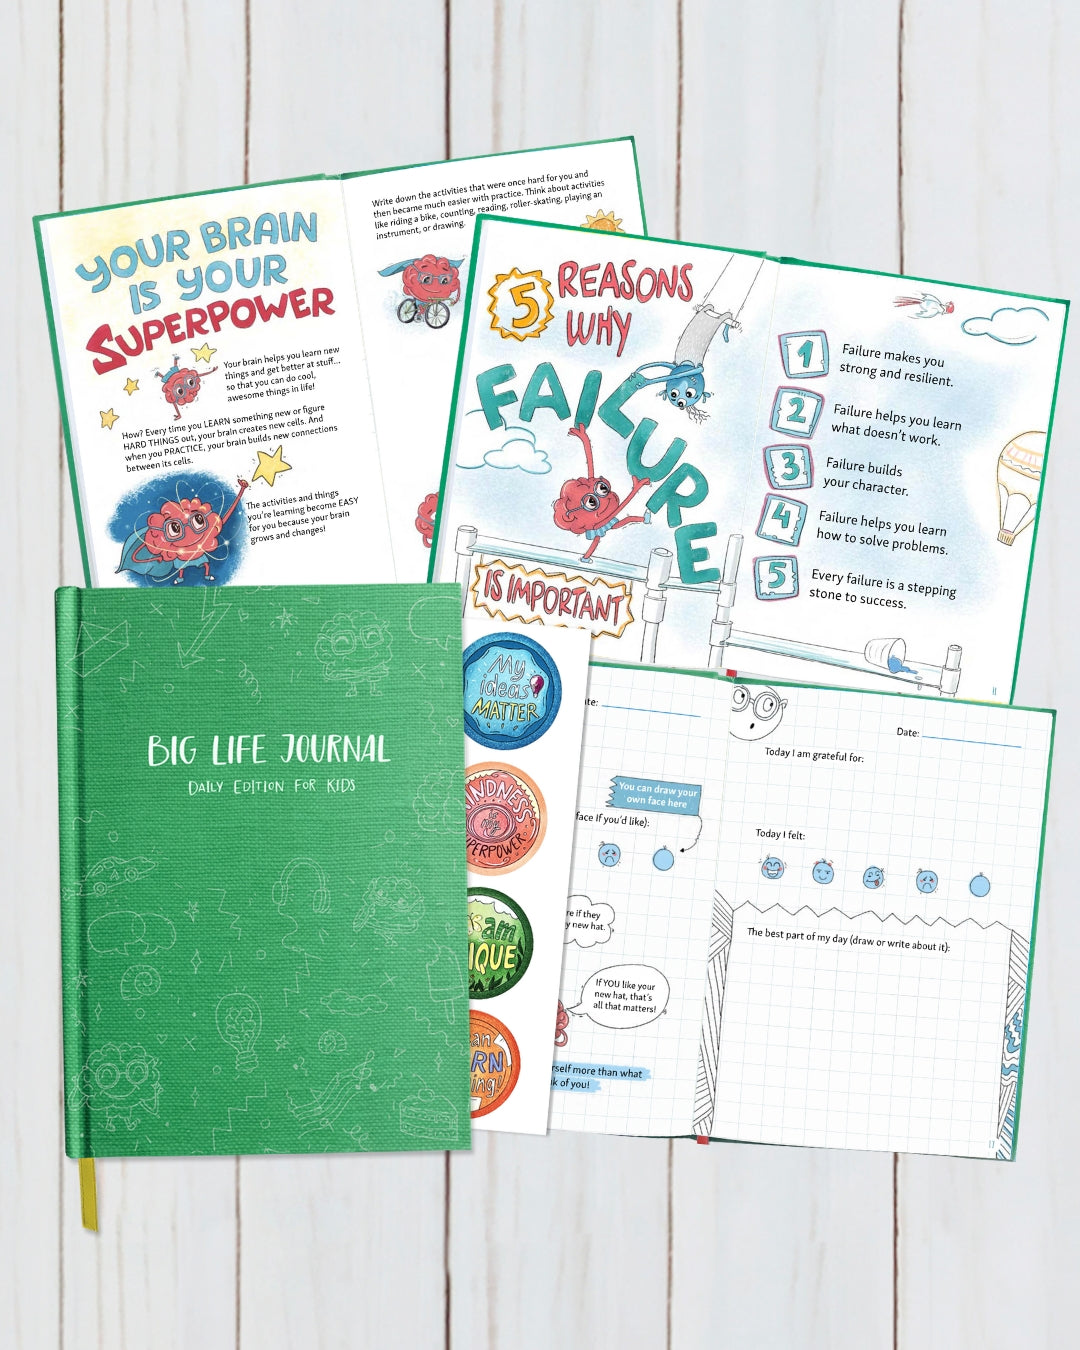 Daily Edition (ages 5-11) + 2nd Edition (ages 7-10) Bundle – Big